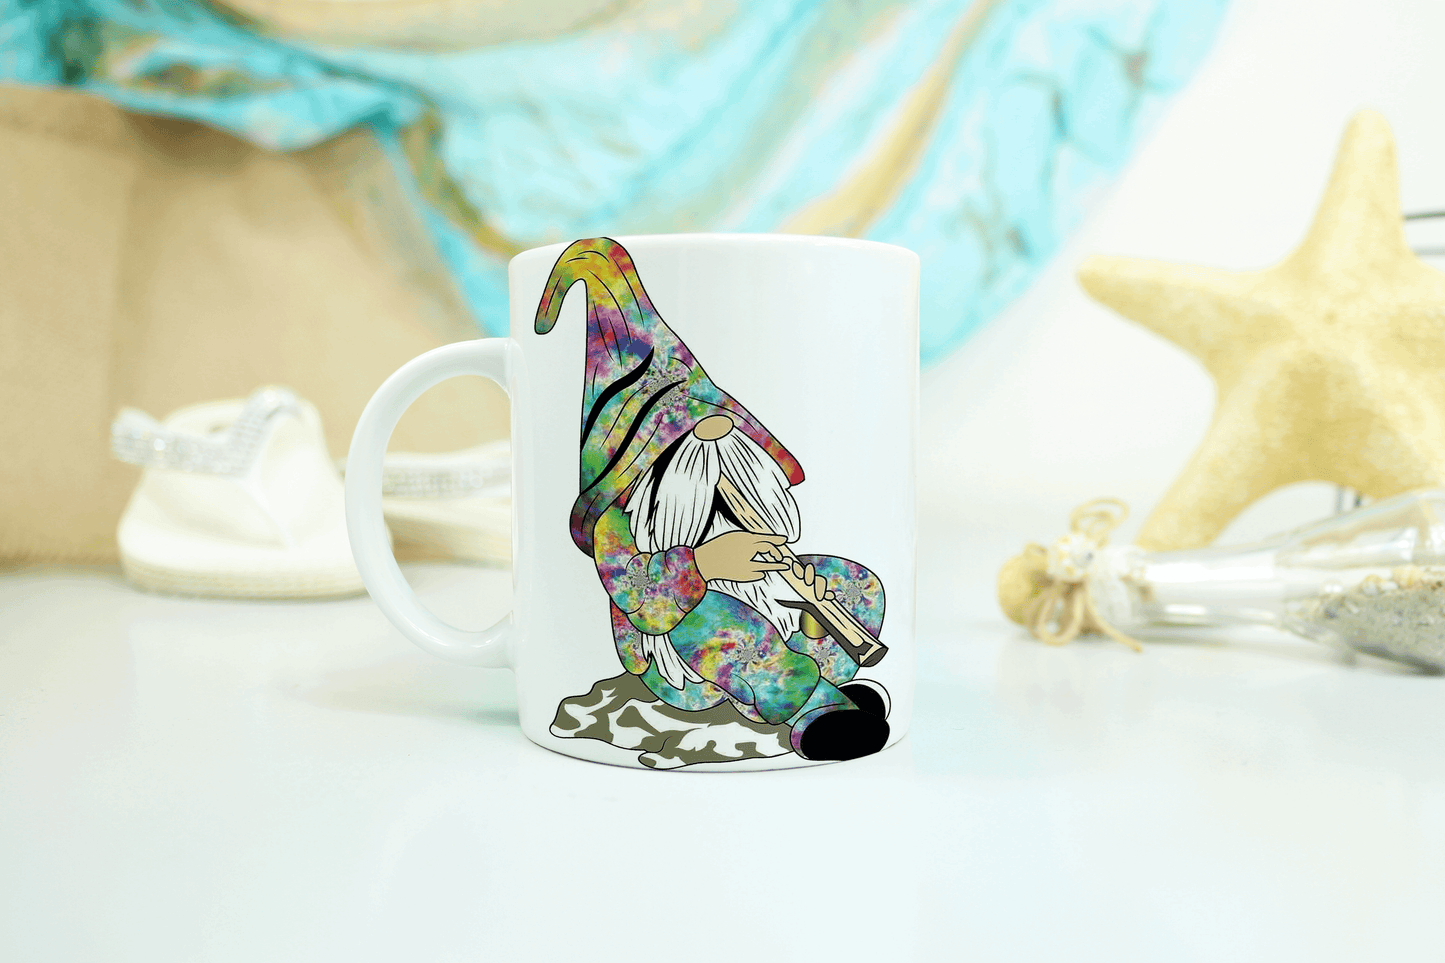  Colourful Gnome Playing a Recorder Mug by Free Spirit Accessories sold by Free Spirit Accessories